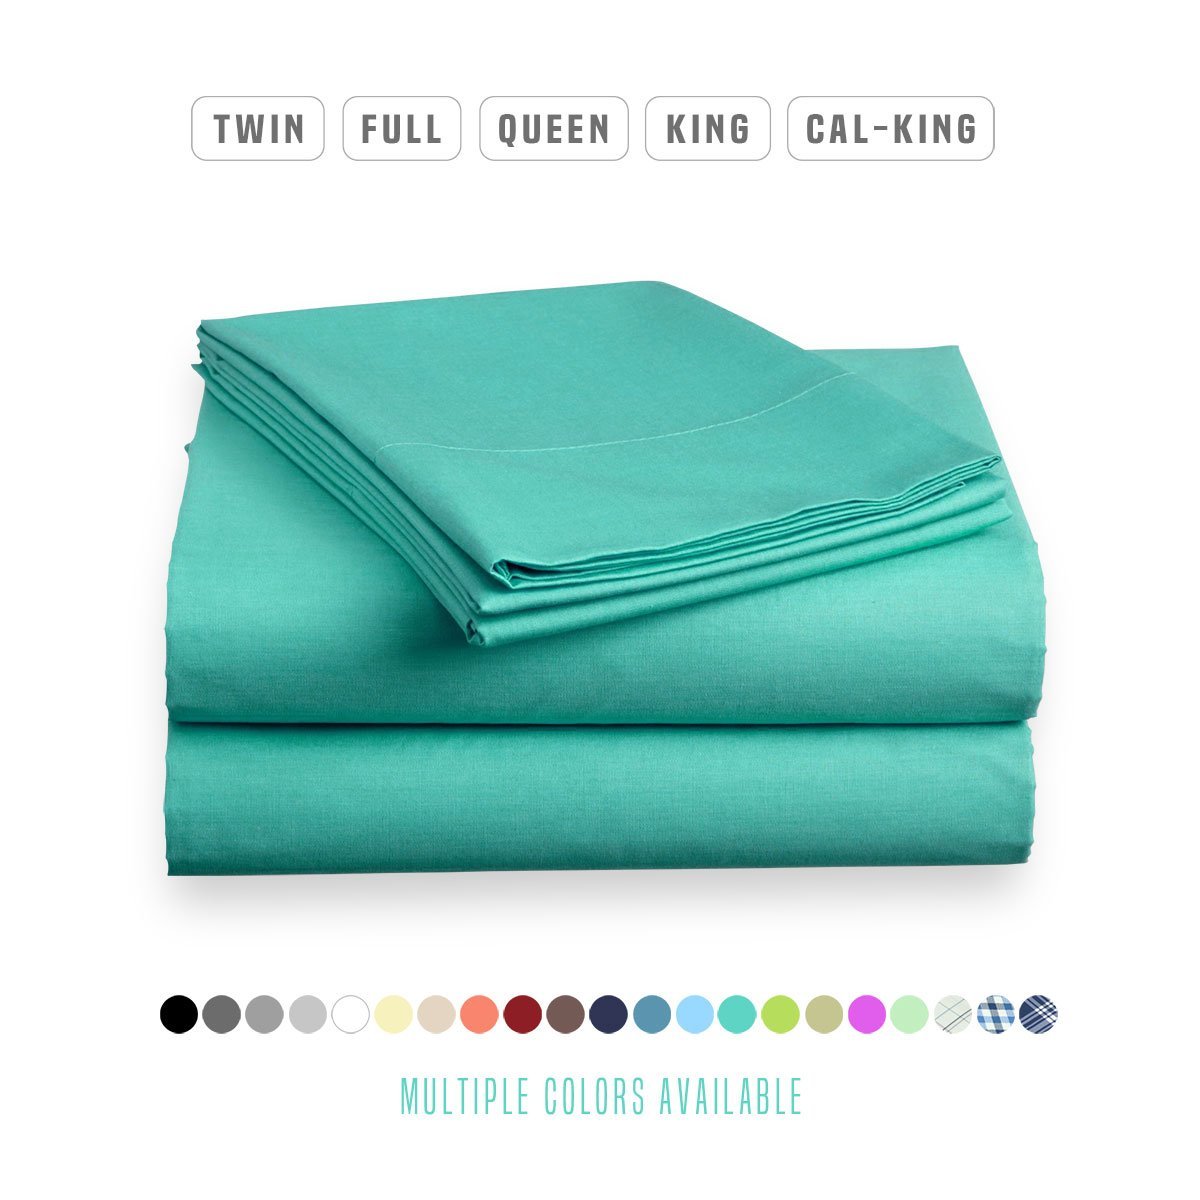 Luxe Bedding Bed Sheet Set - Brushed Microfiber 2000 Bedding - Wrinkle, Fade, Stain Resistant - Hypoallergenic - 4 Piece - Unique Christmas Presents for family (Queen, Turquoise)